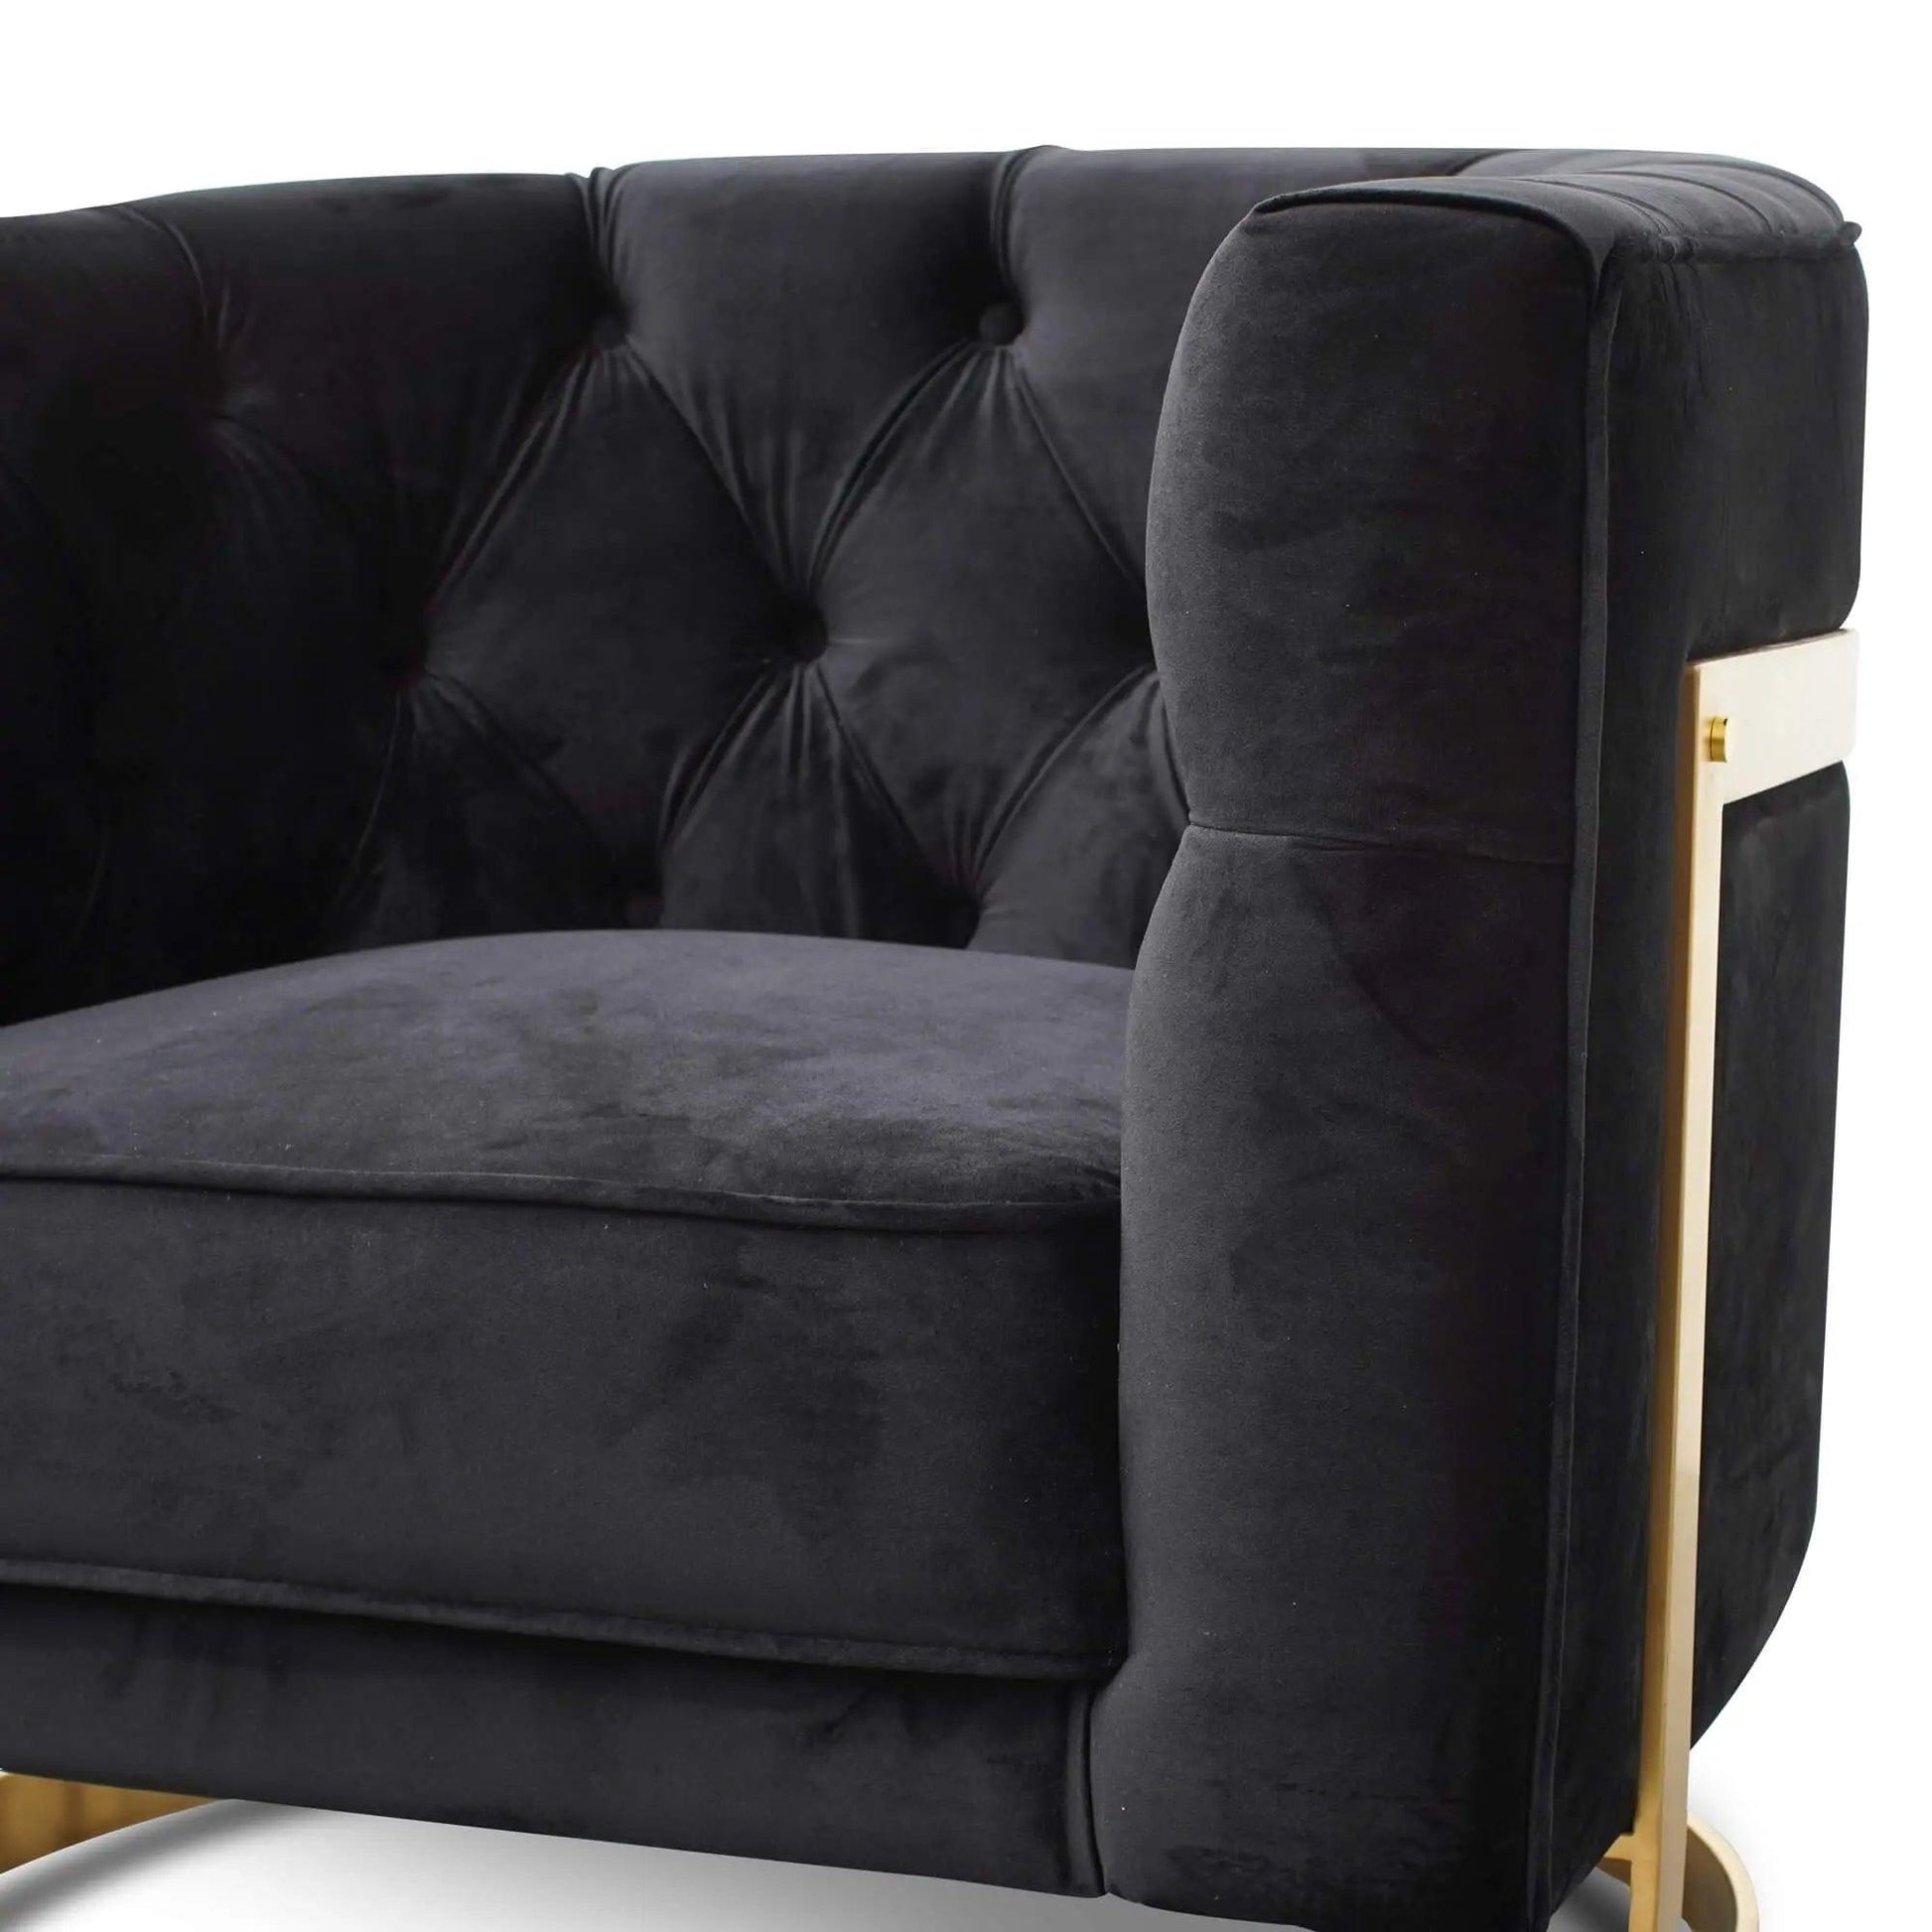 Calibre Armchair in Black Velvet - Brushed Gold Base LC2324-BS - Arm ChairsLC2324-BS 3